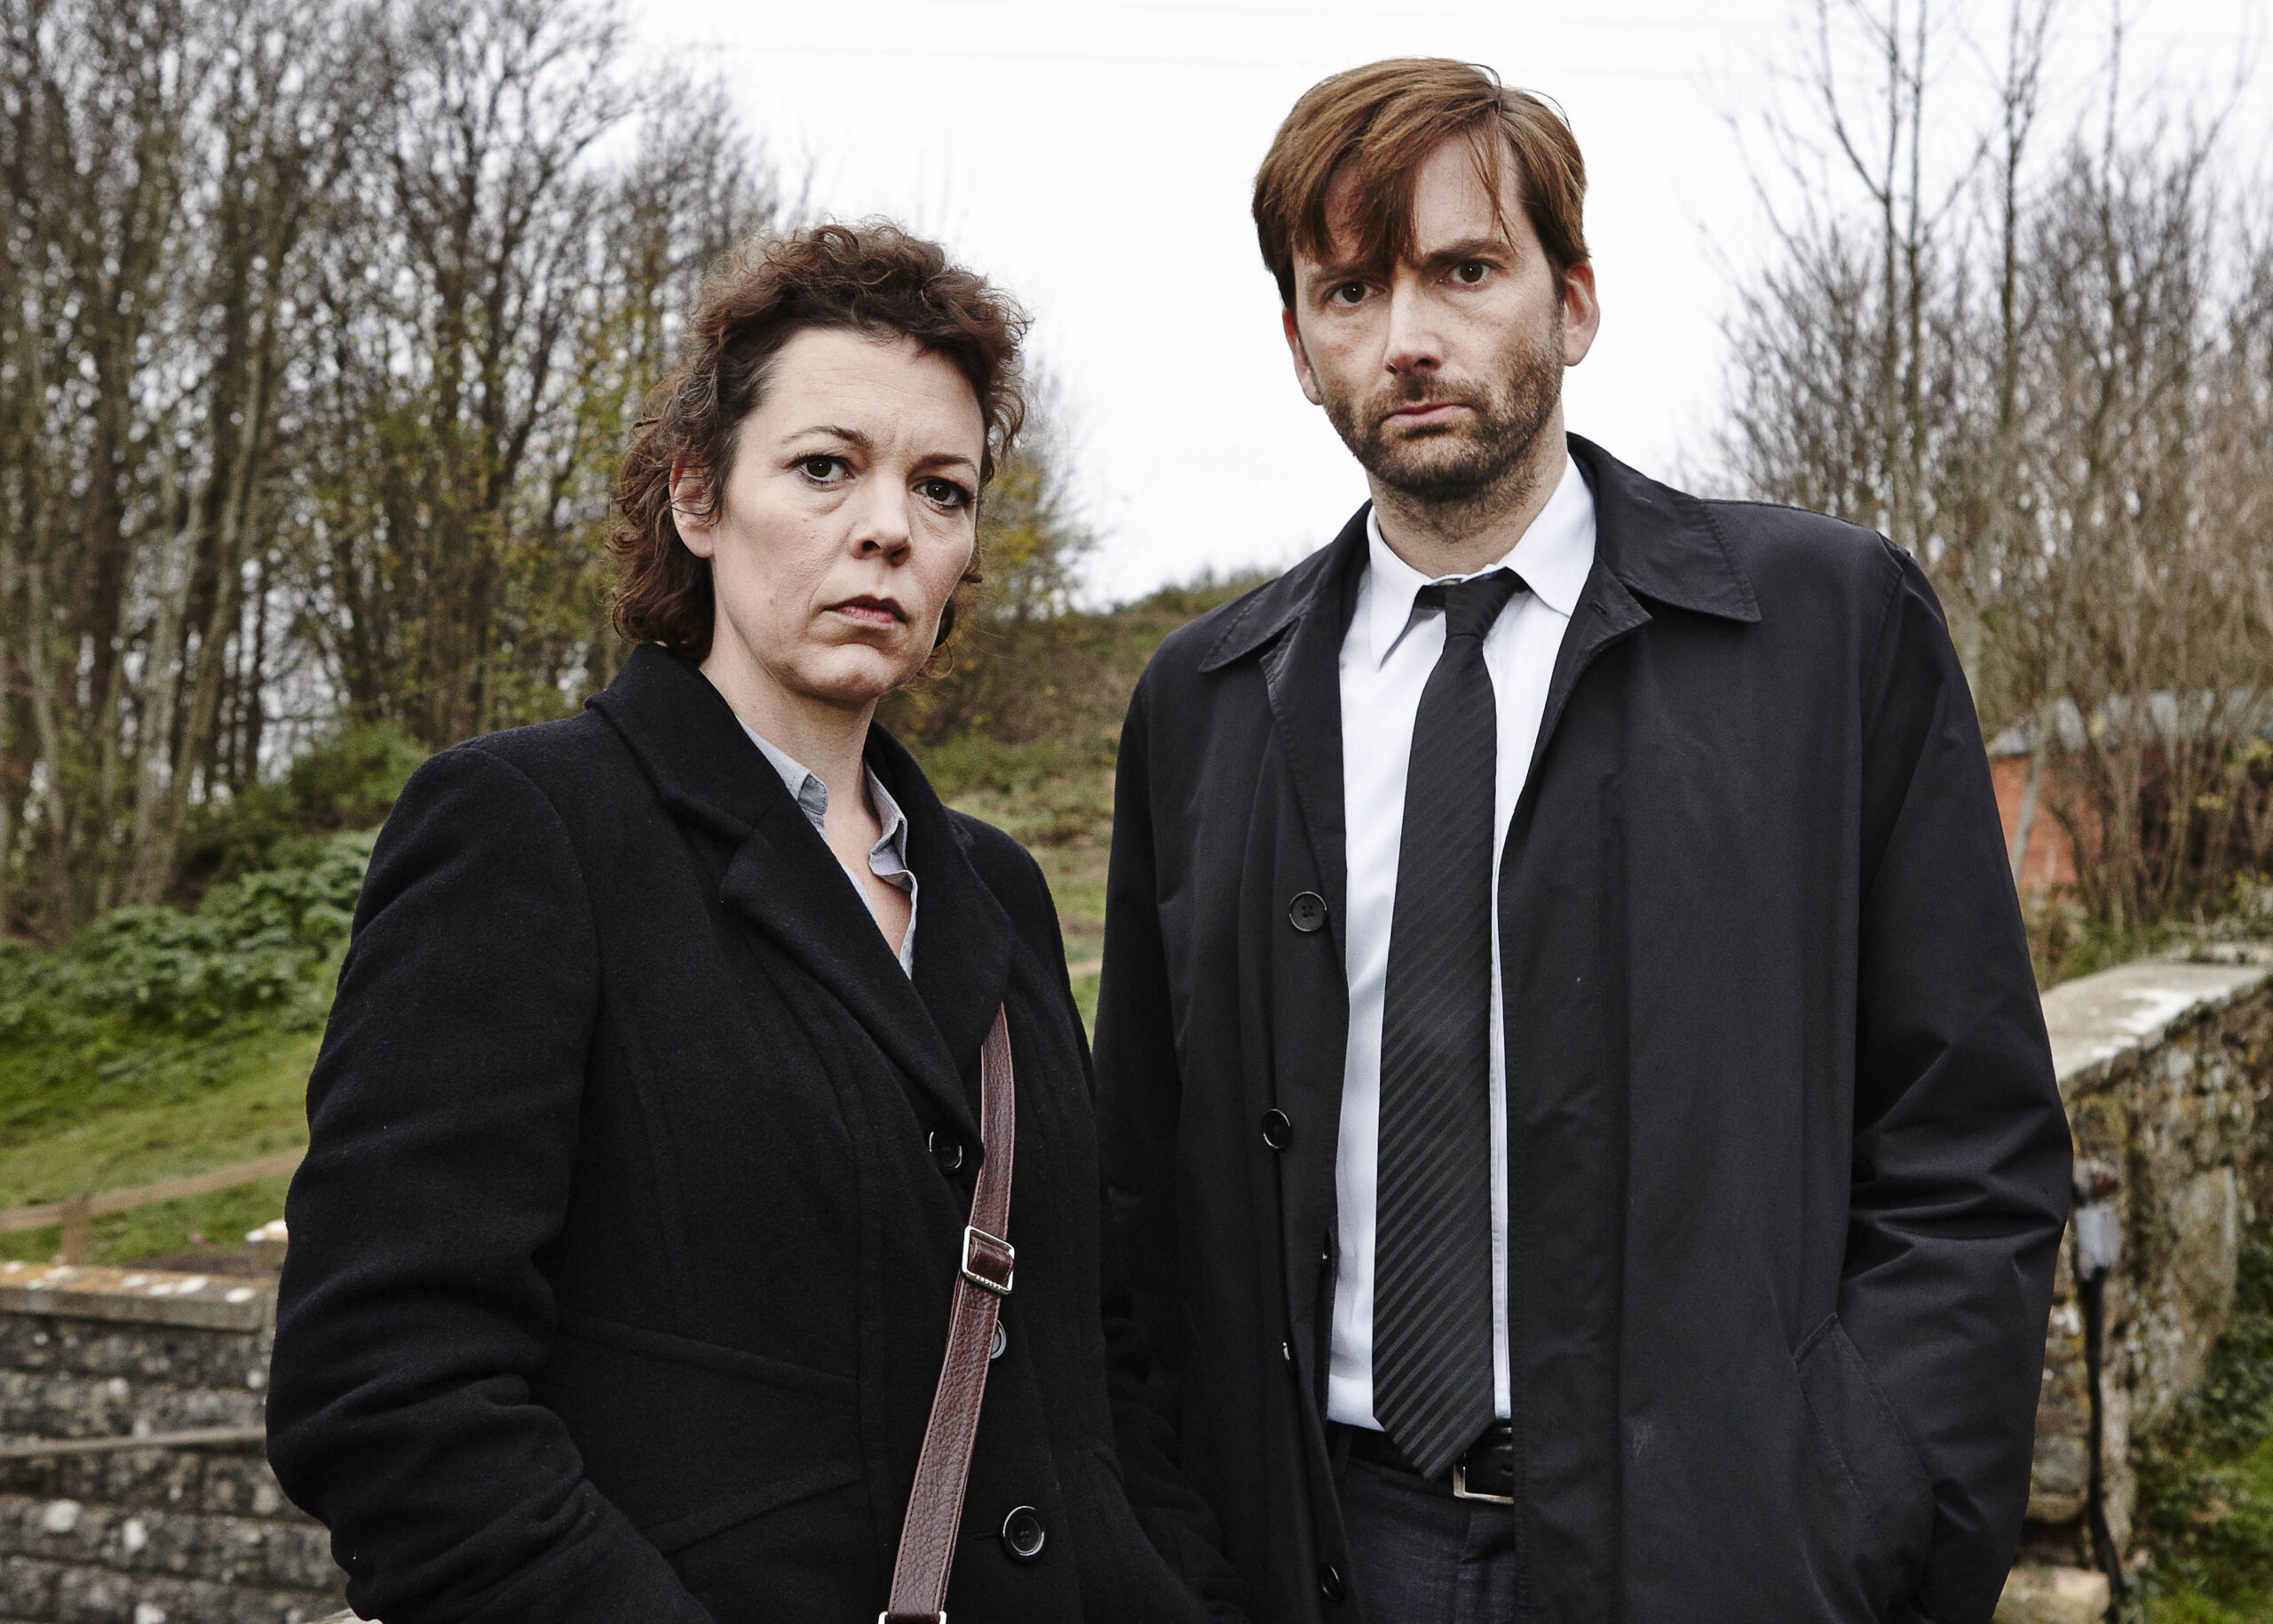 Broadchurch TV series, Streaming on PBS Masterpiece, Engrossing mystery, Compelling performances, 2560x1830 HD Desktop